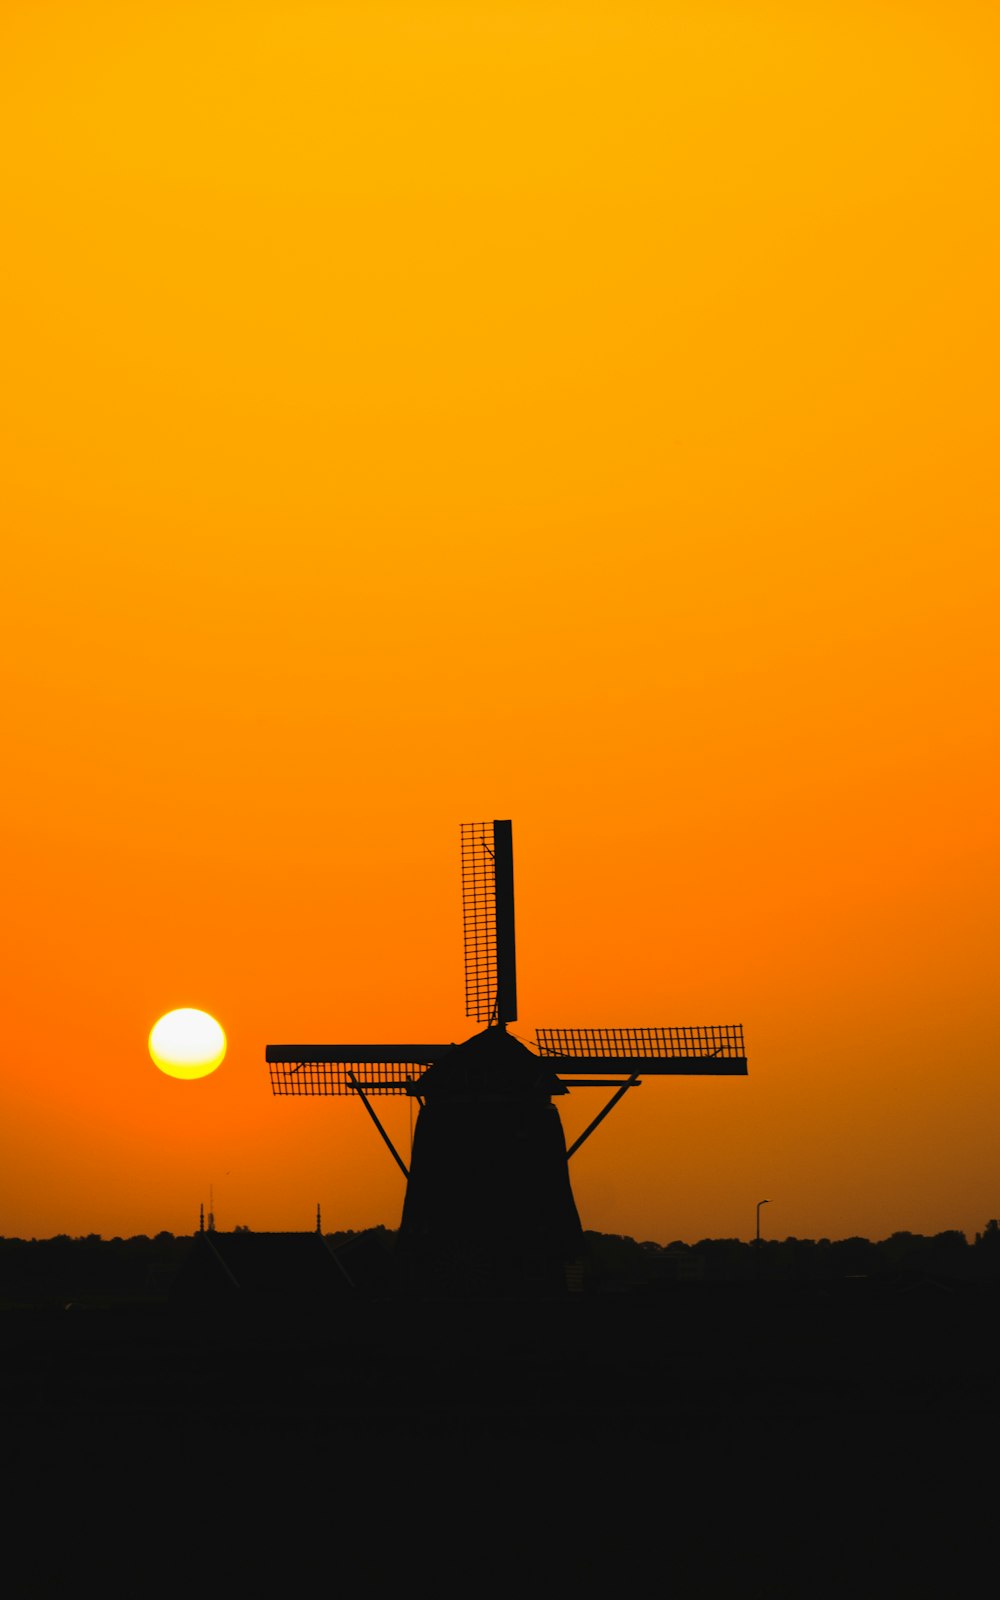 the sun is setting behind a windmill in a field